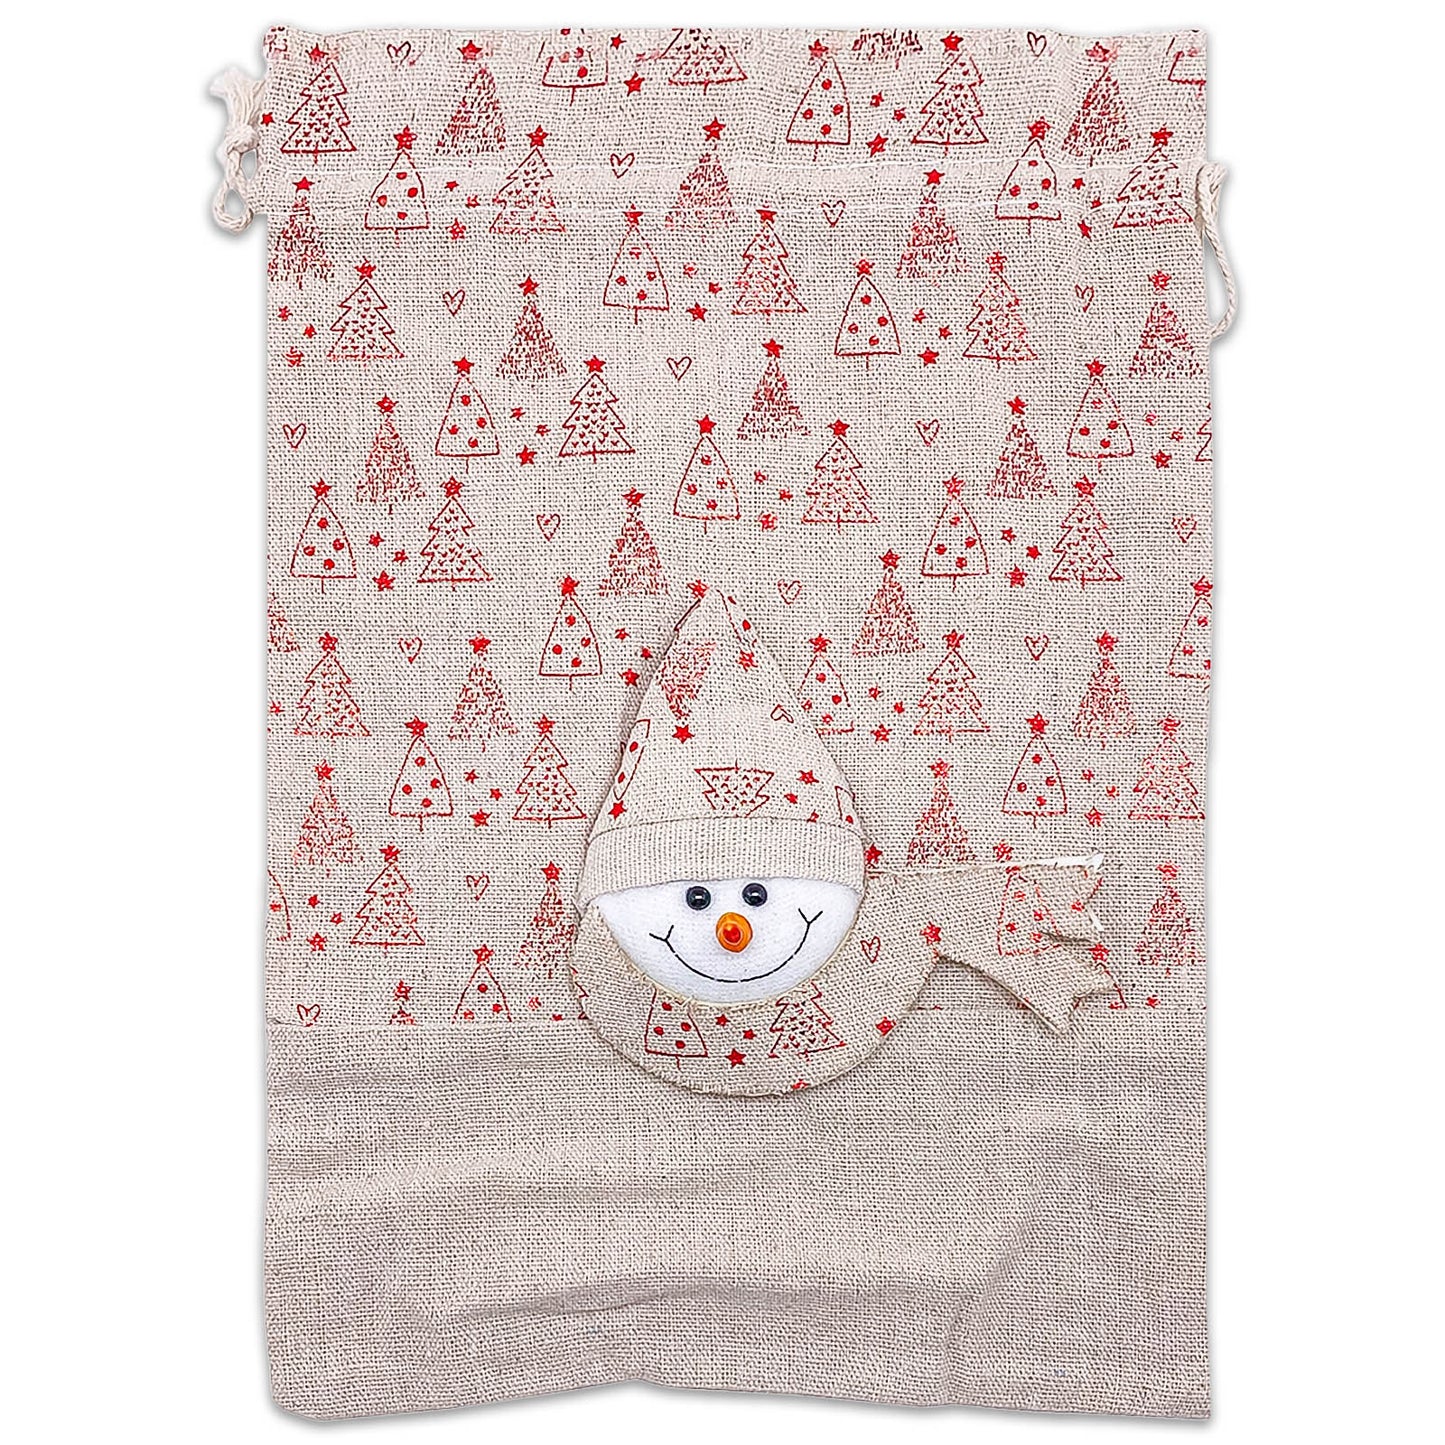 6 Pack of Cotton Muslin Snowman Christmas Tree Drawstring Gift Bags